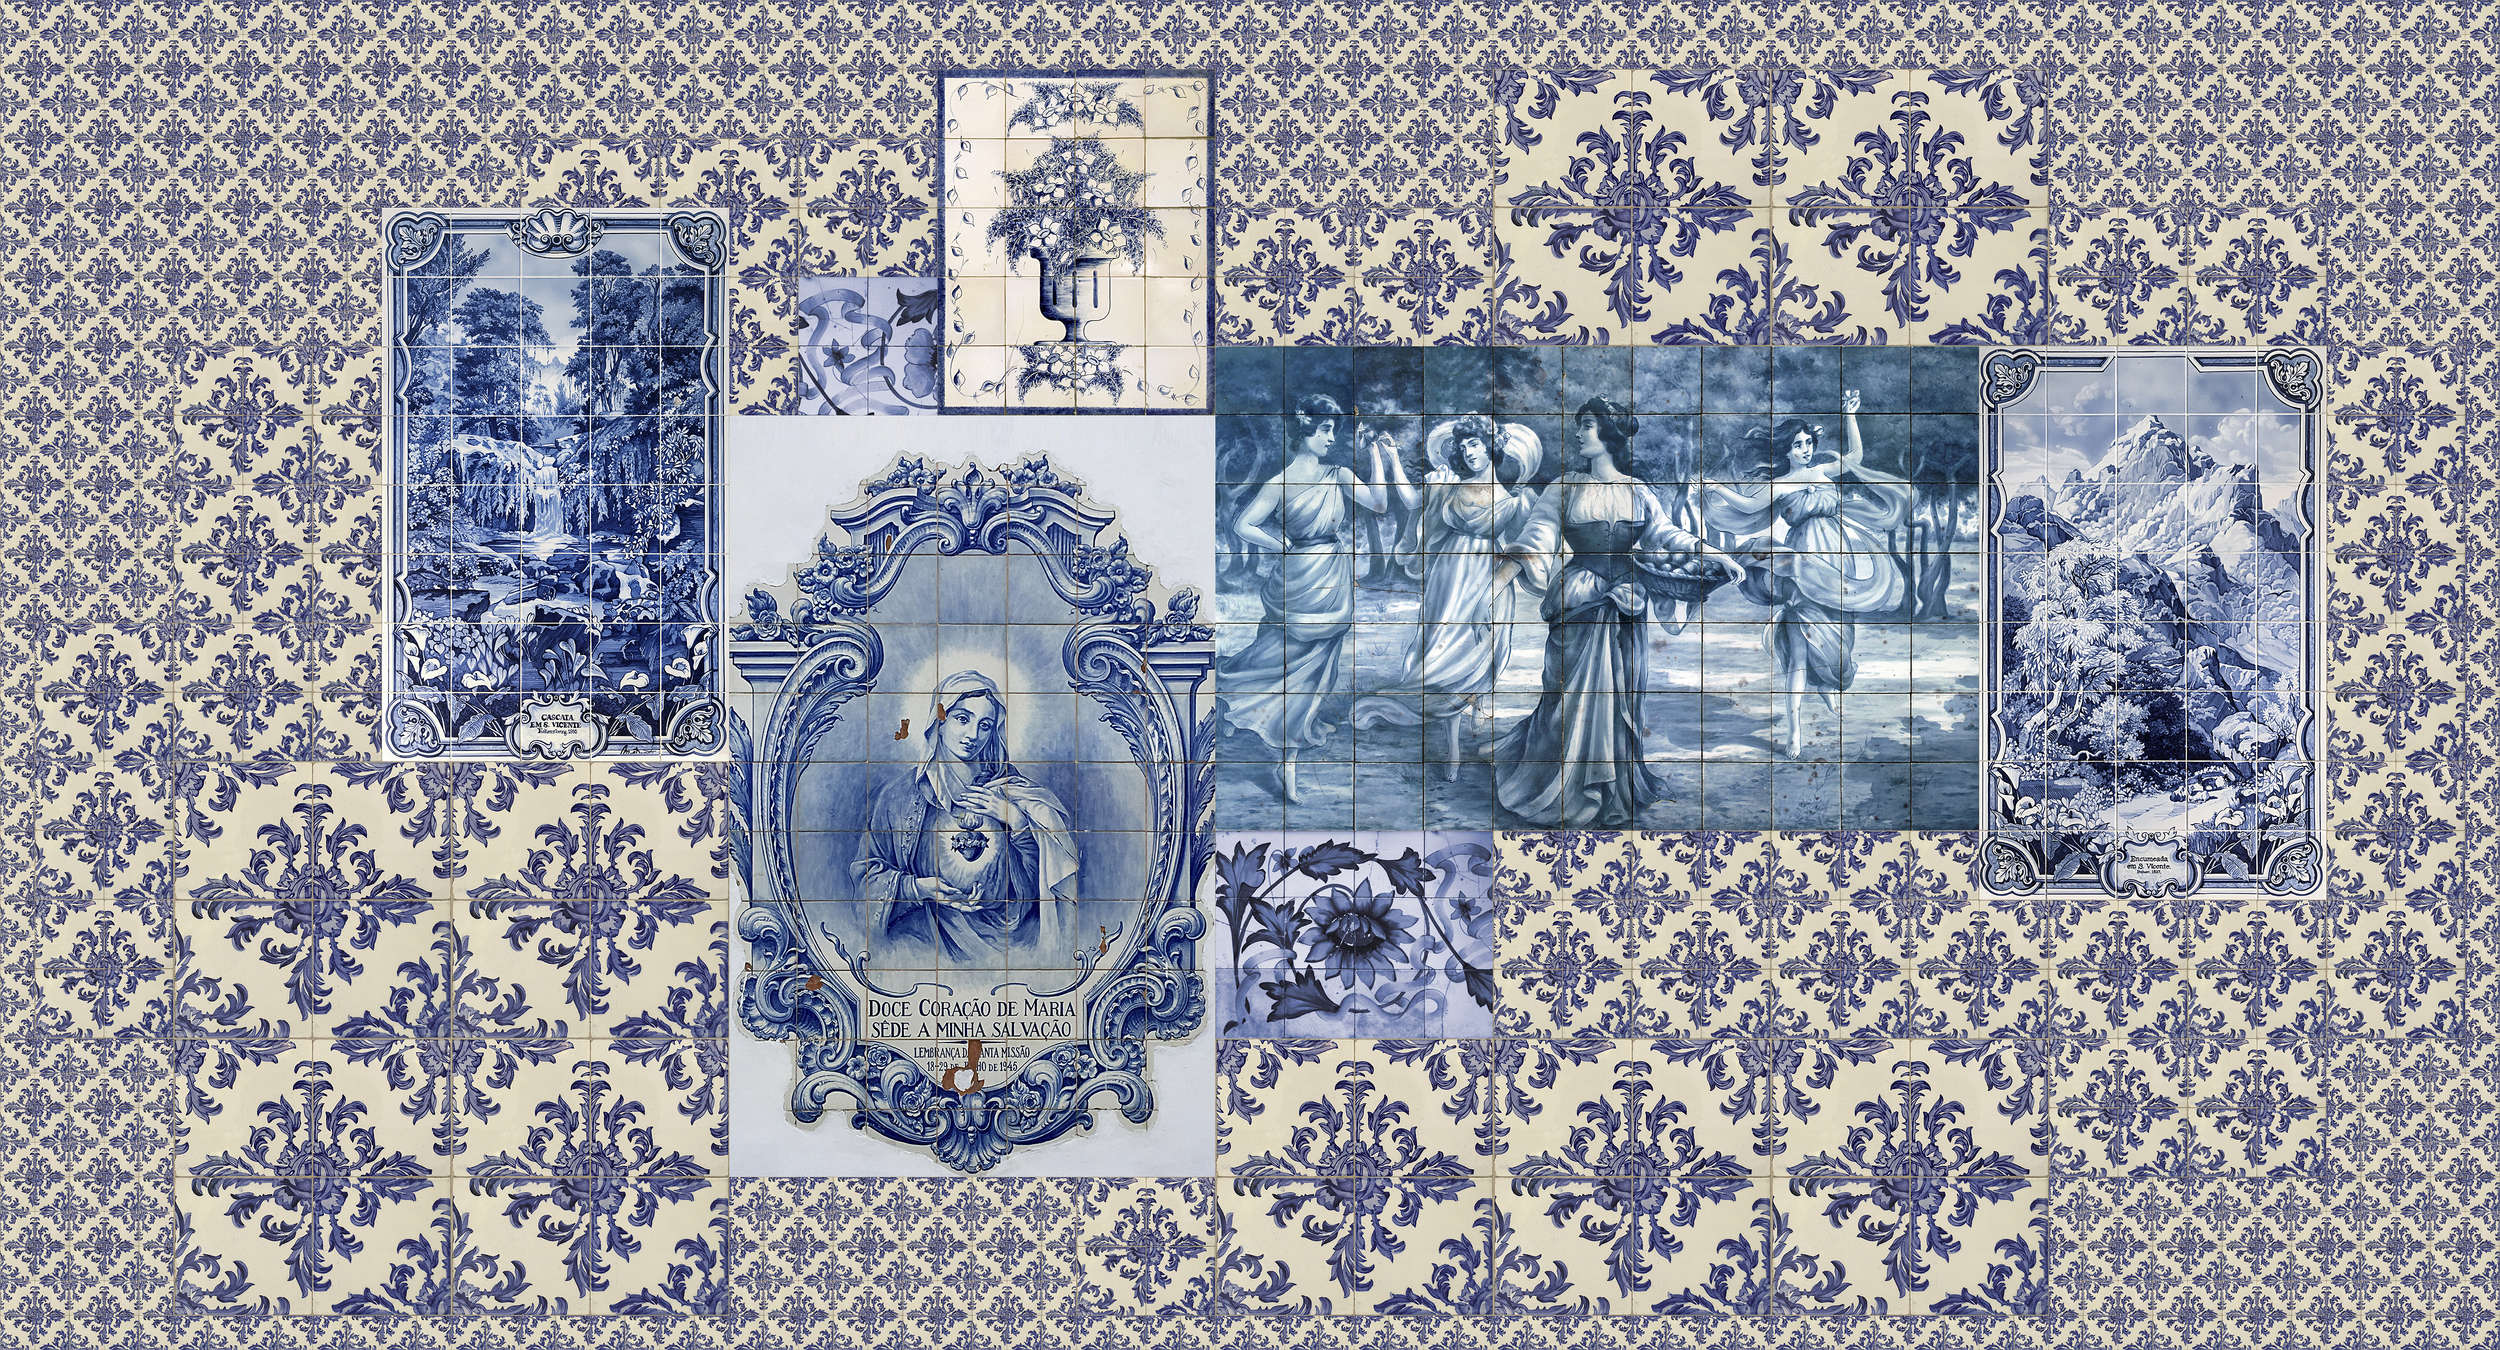             Azulejos 1 - Wallpaper Tiles Collage Retro Style - Beige, Blue | Mother of Pearl Smooth Non-woven
        